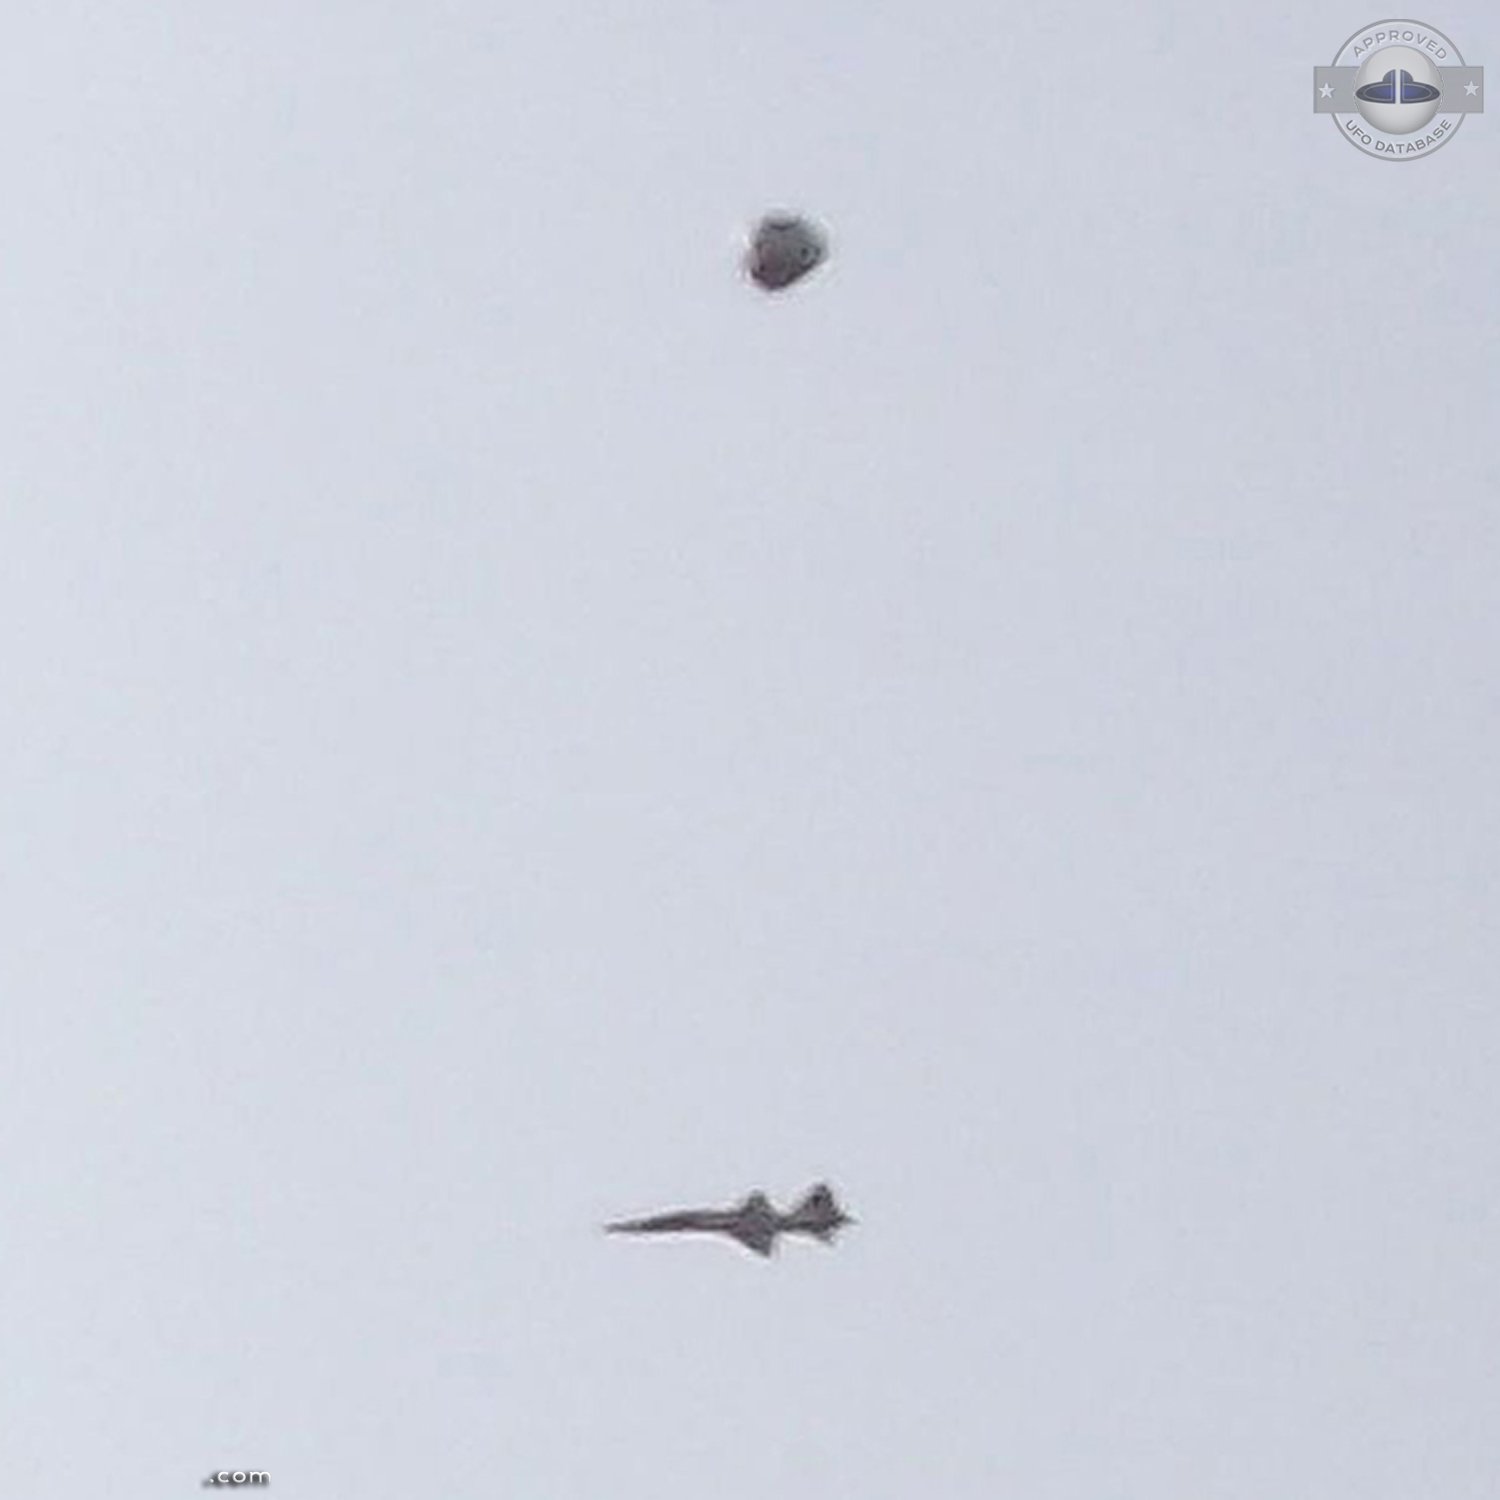 F-5 fighter aircraft seen near UFO in Doganbey, Aegean in Turkey 20144 UFO Picture #569-3